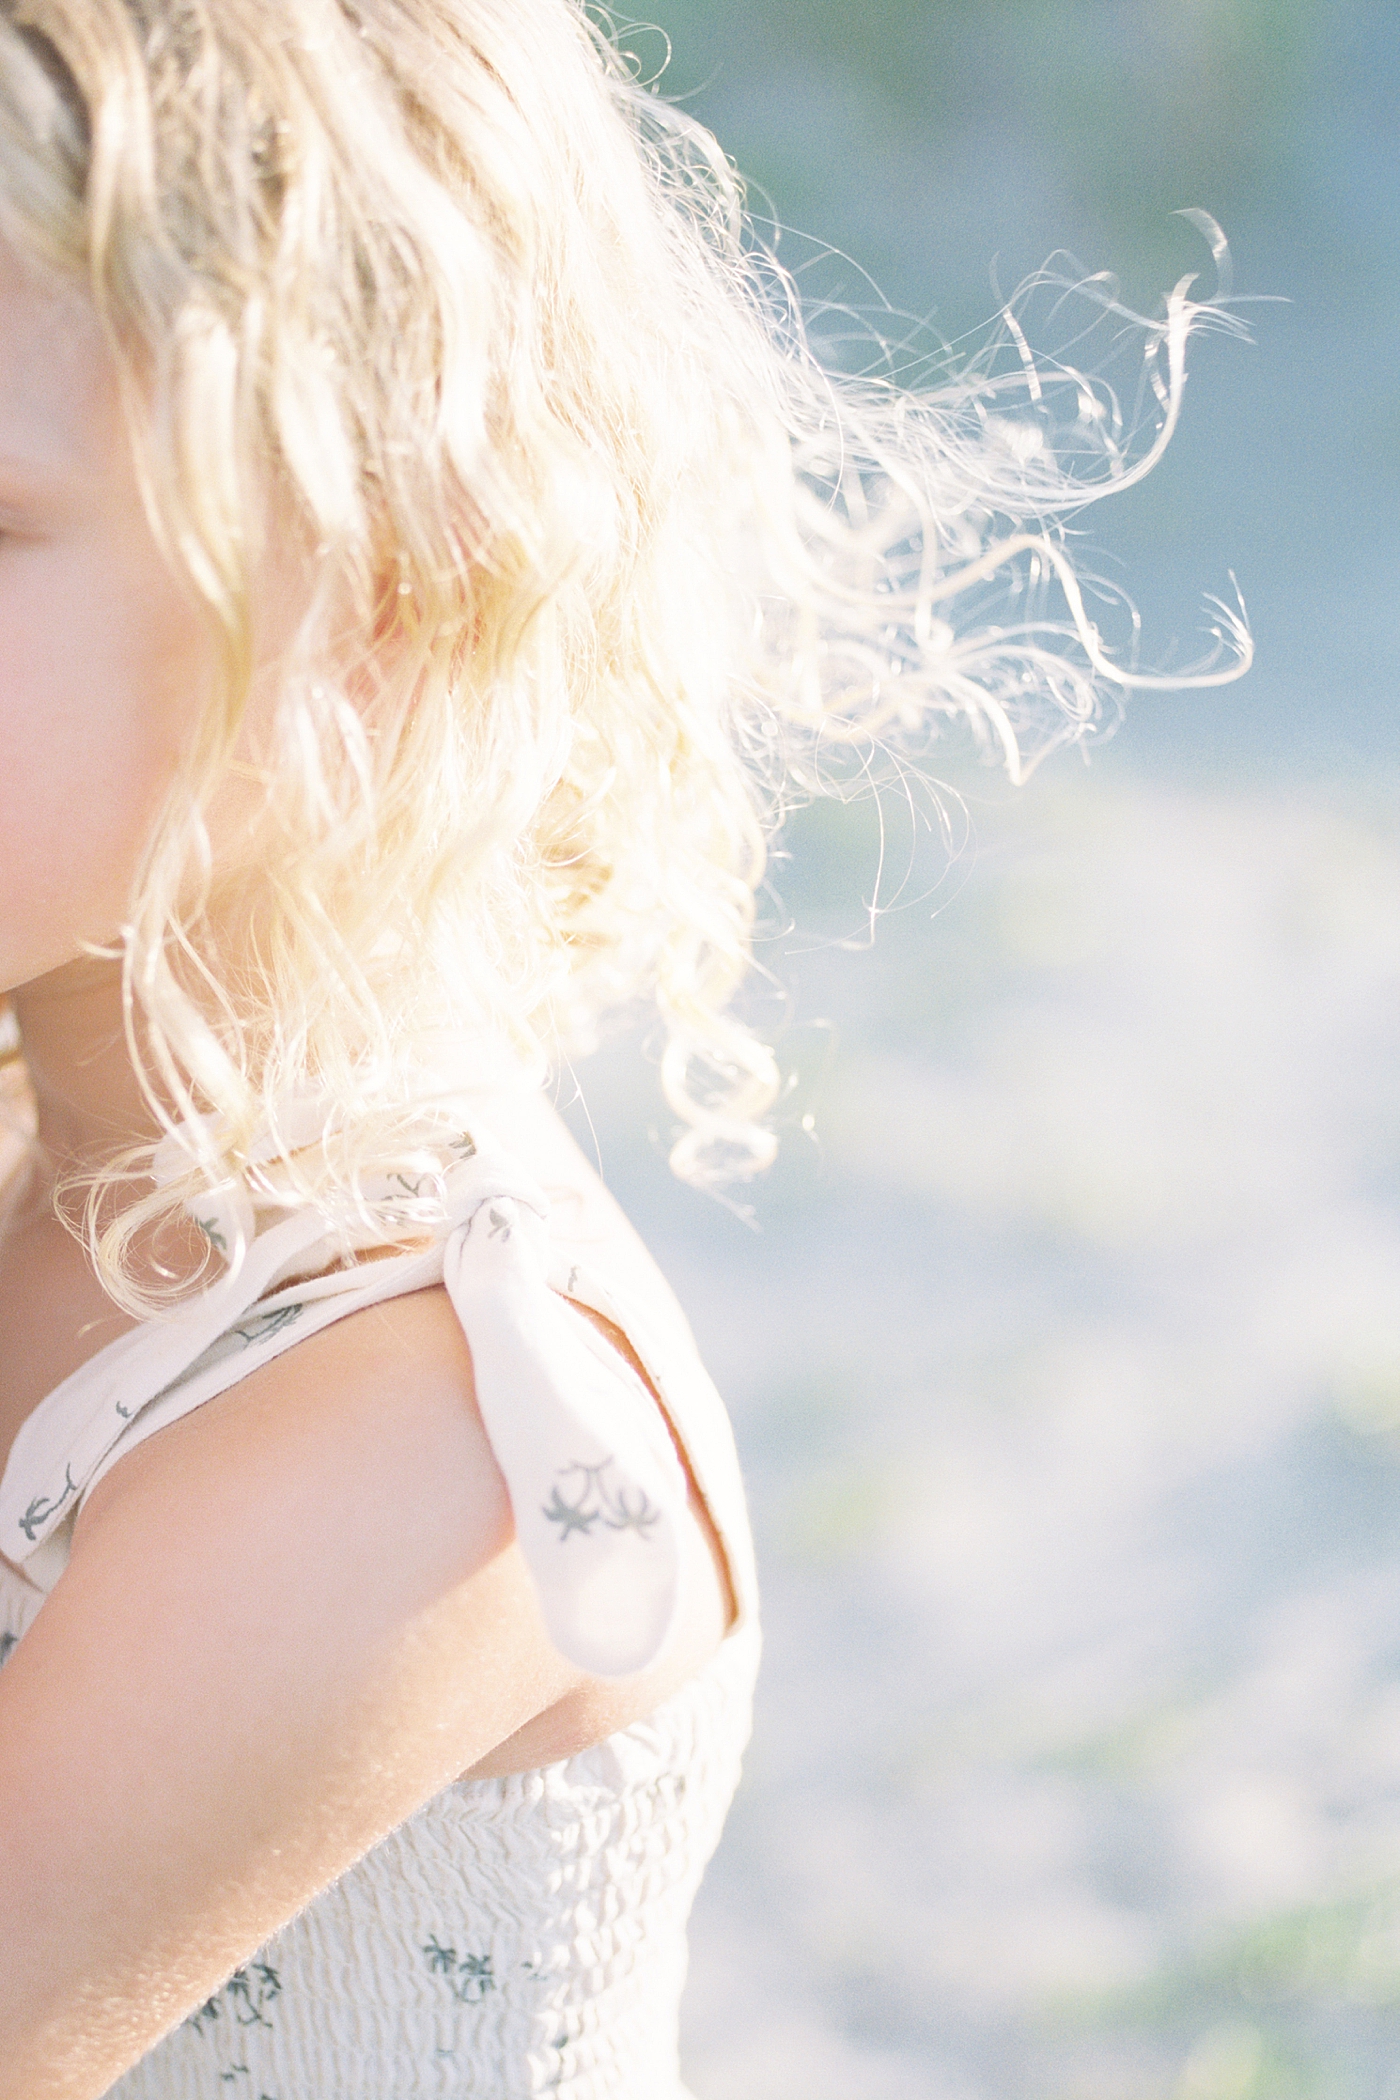 Detail of little girl's blonde hair blowing over her shoulder | Image by Caitlyn Motycka